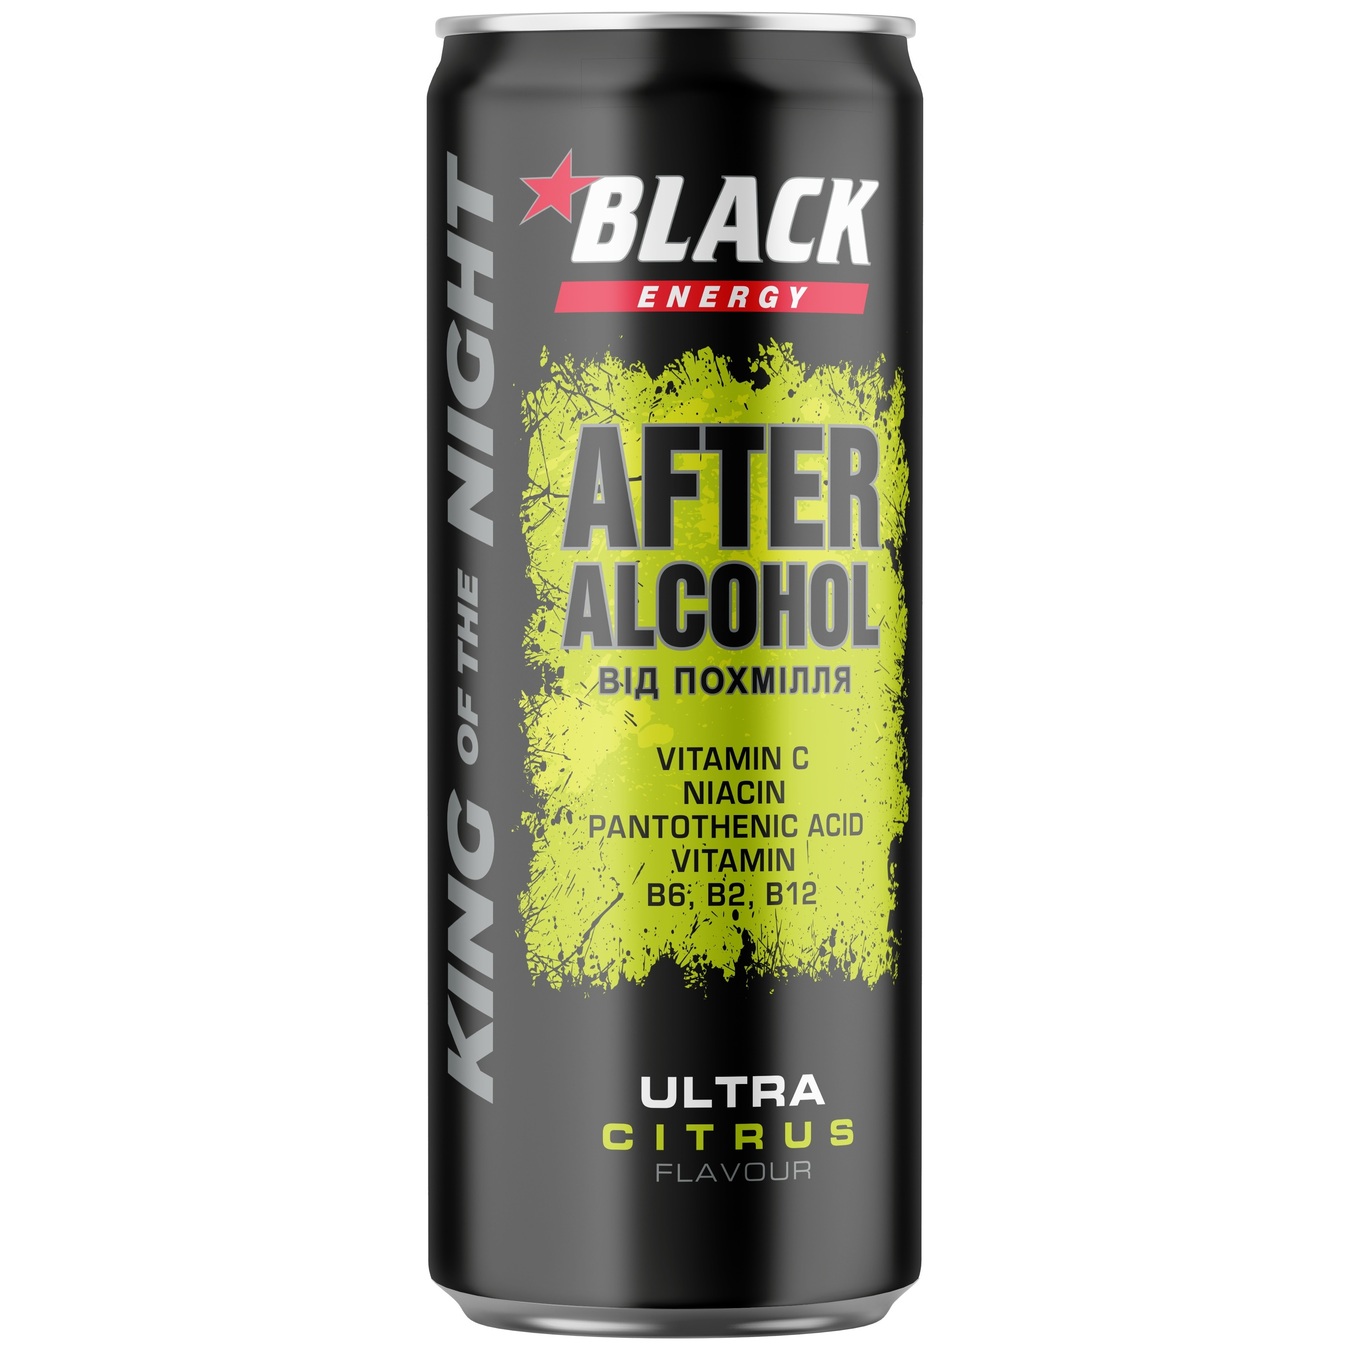 Black Energy After alcohol energy drink 0.25 l iron can